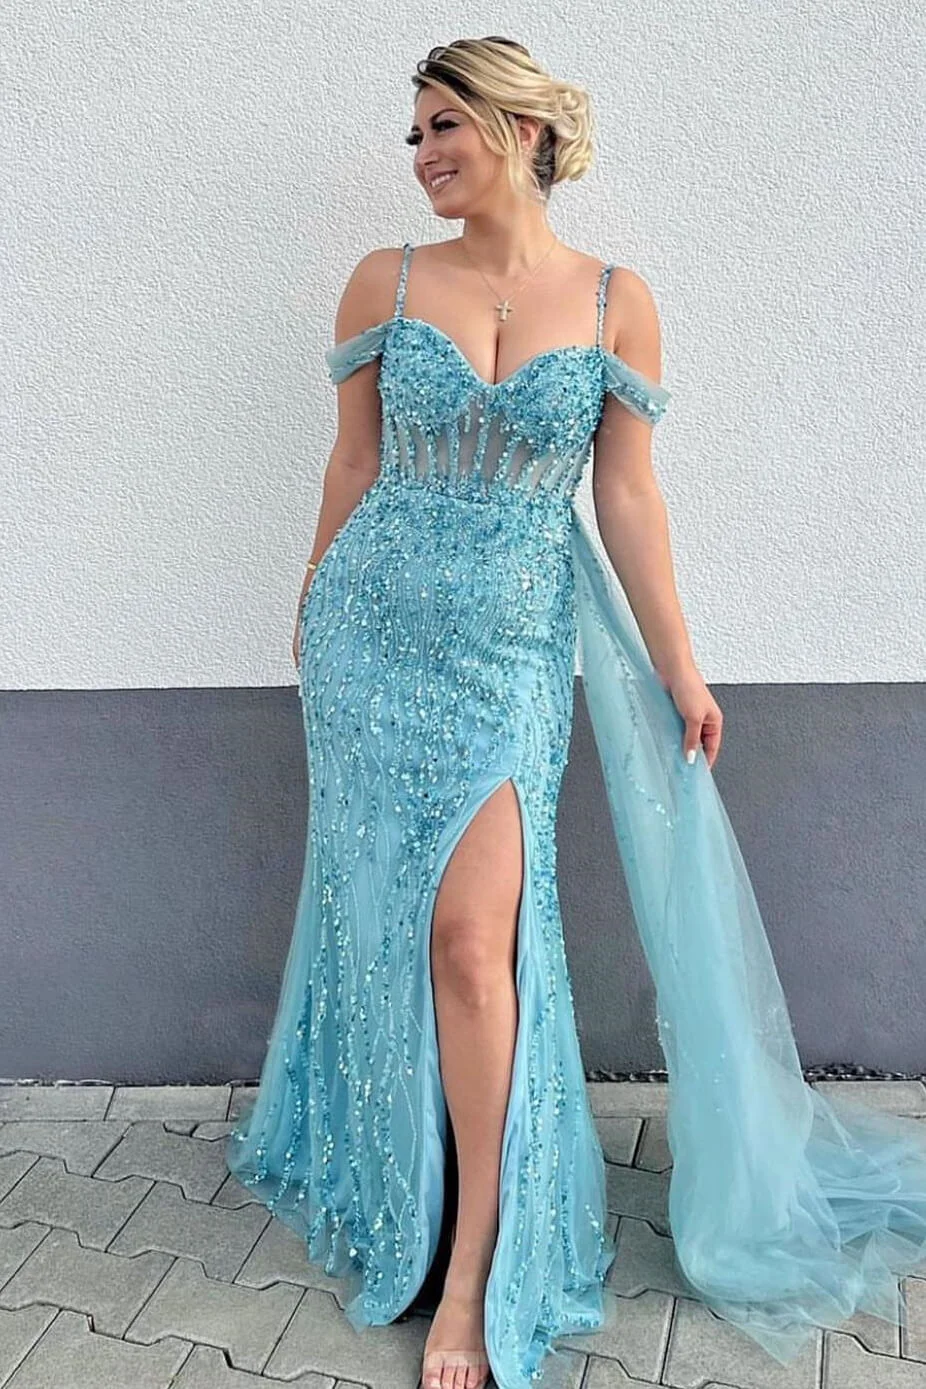 Luluslly Off-the-Shoulder Mermaid Blue Prom Dress With Appliques Beads Front Slit